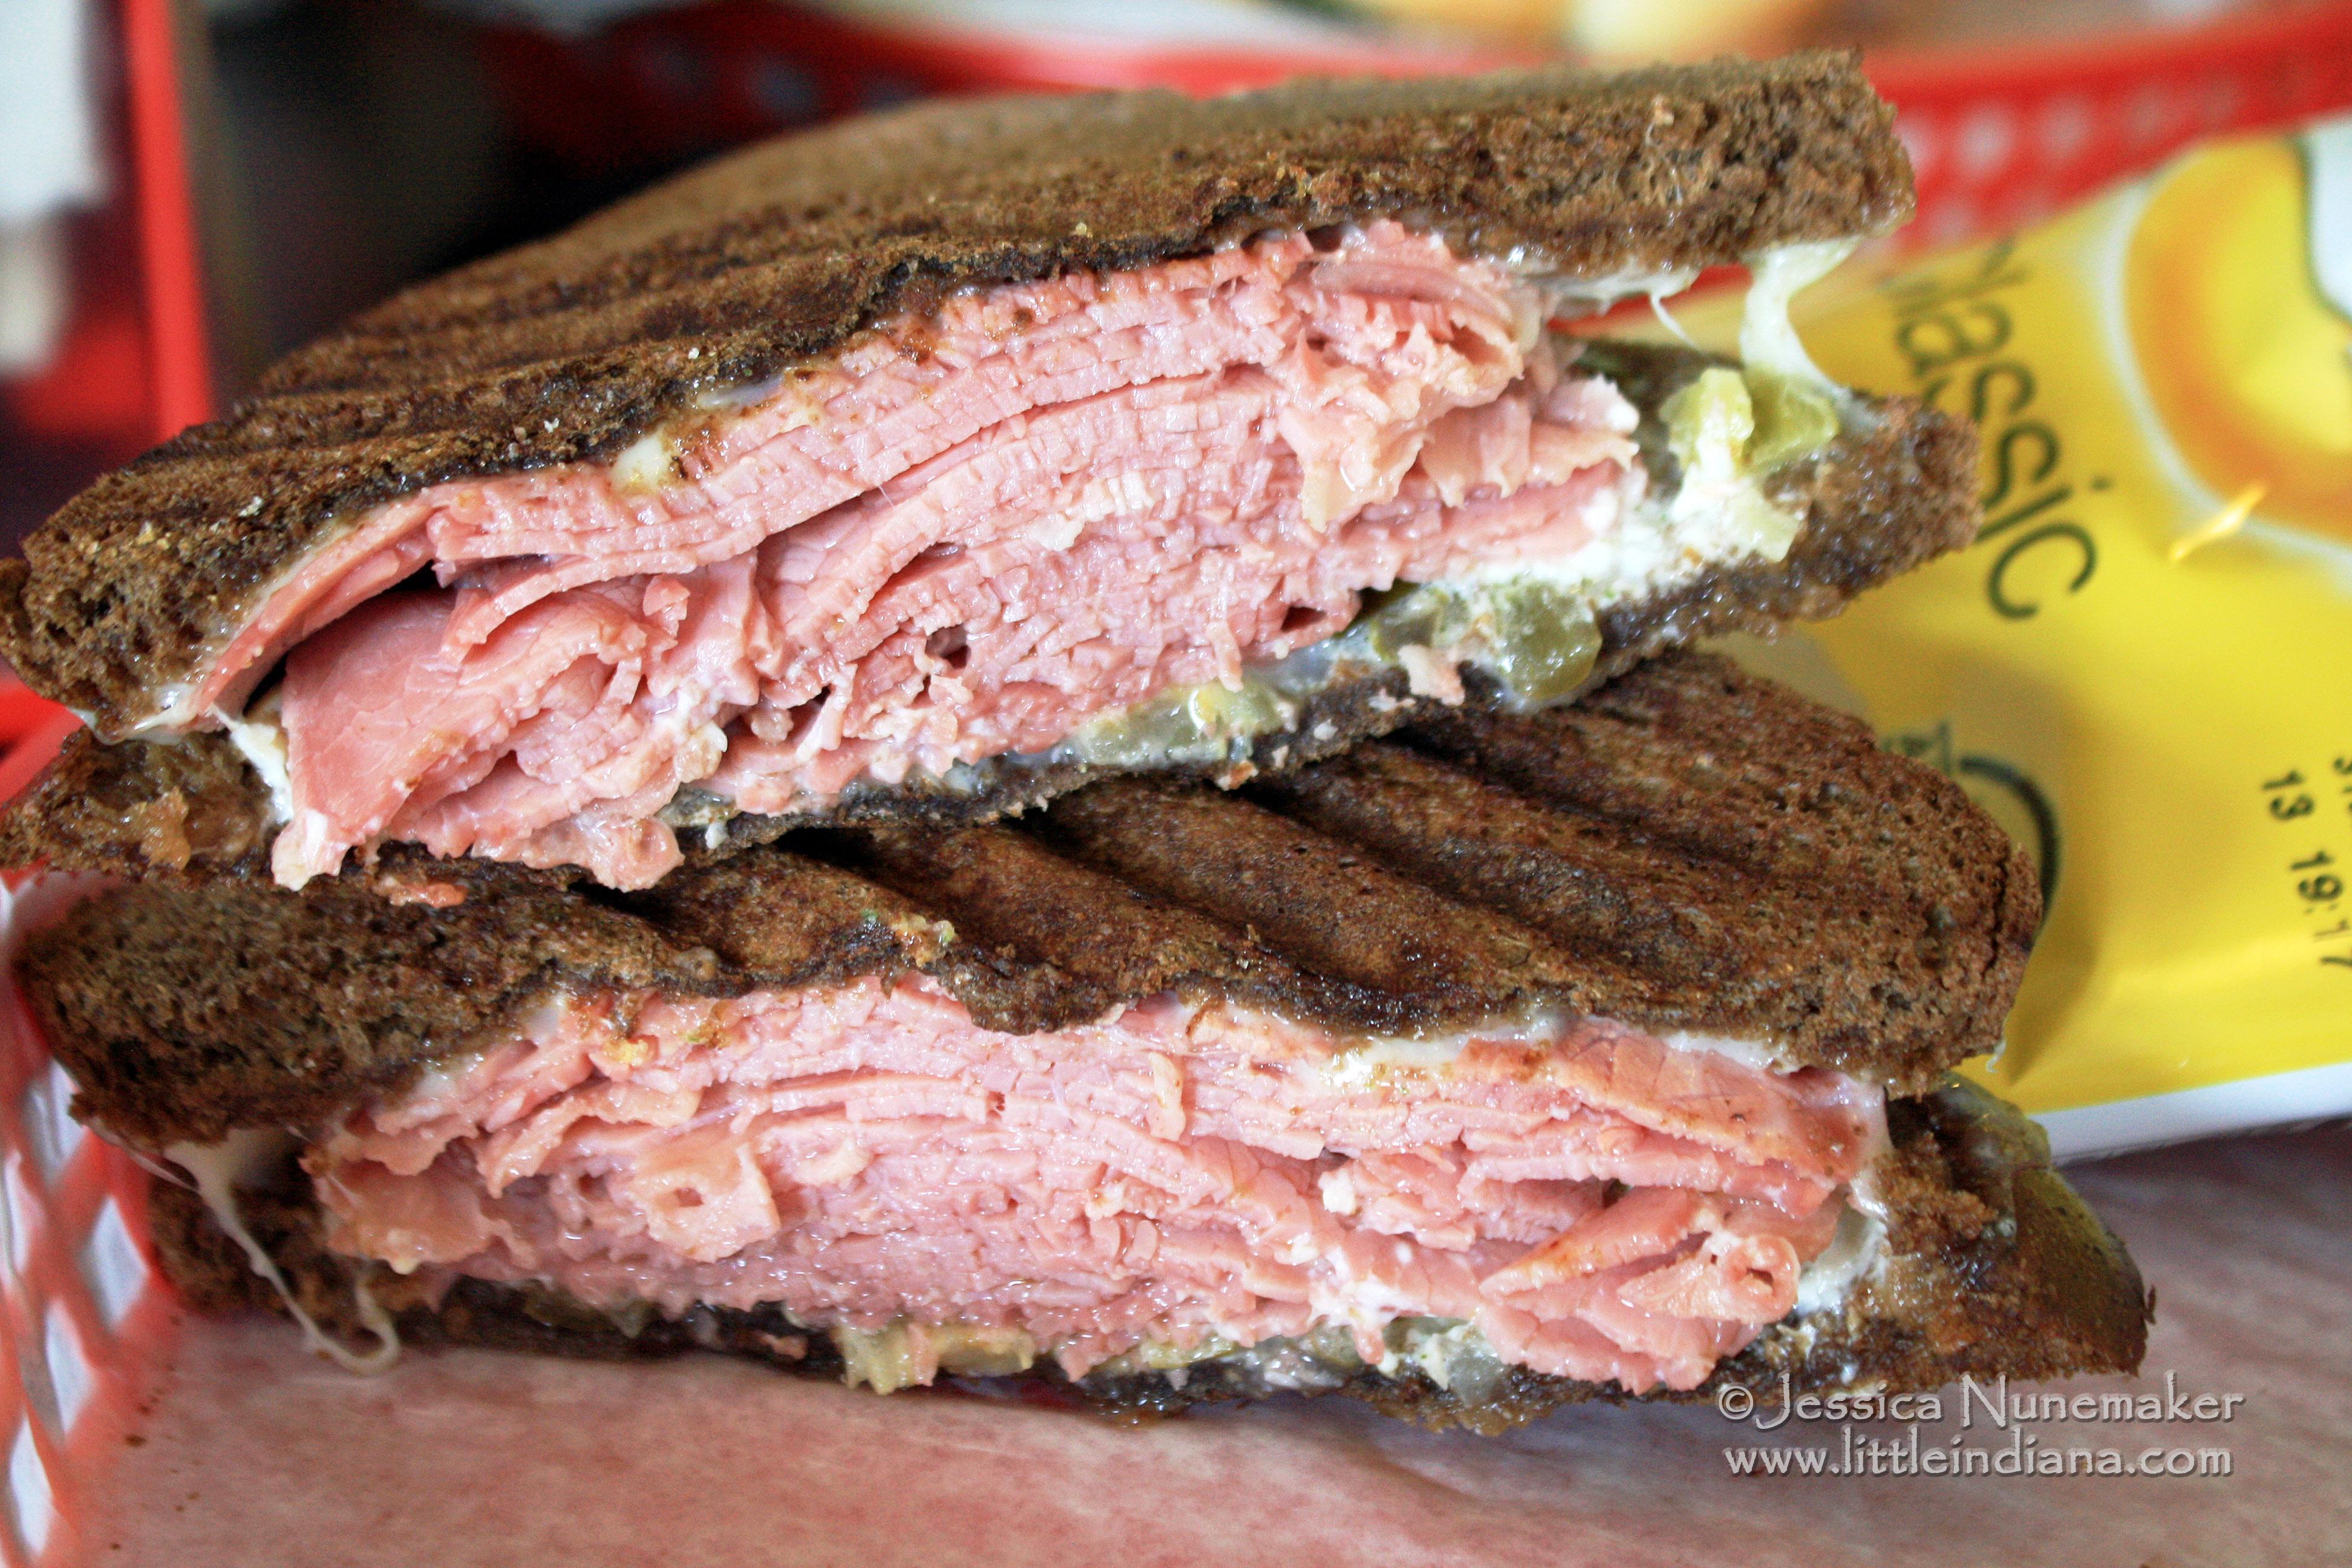 Red Pepper Deli and Cafe: Madison, Indiana